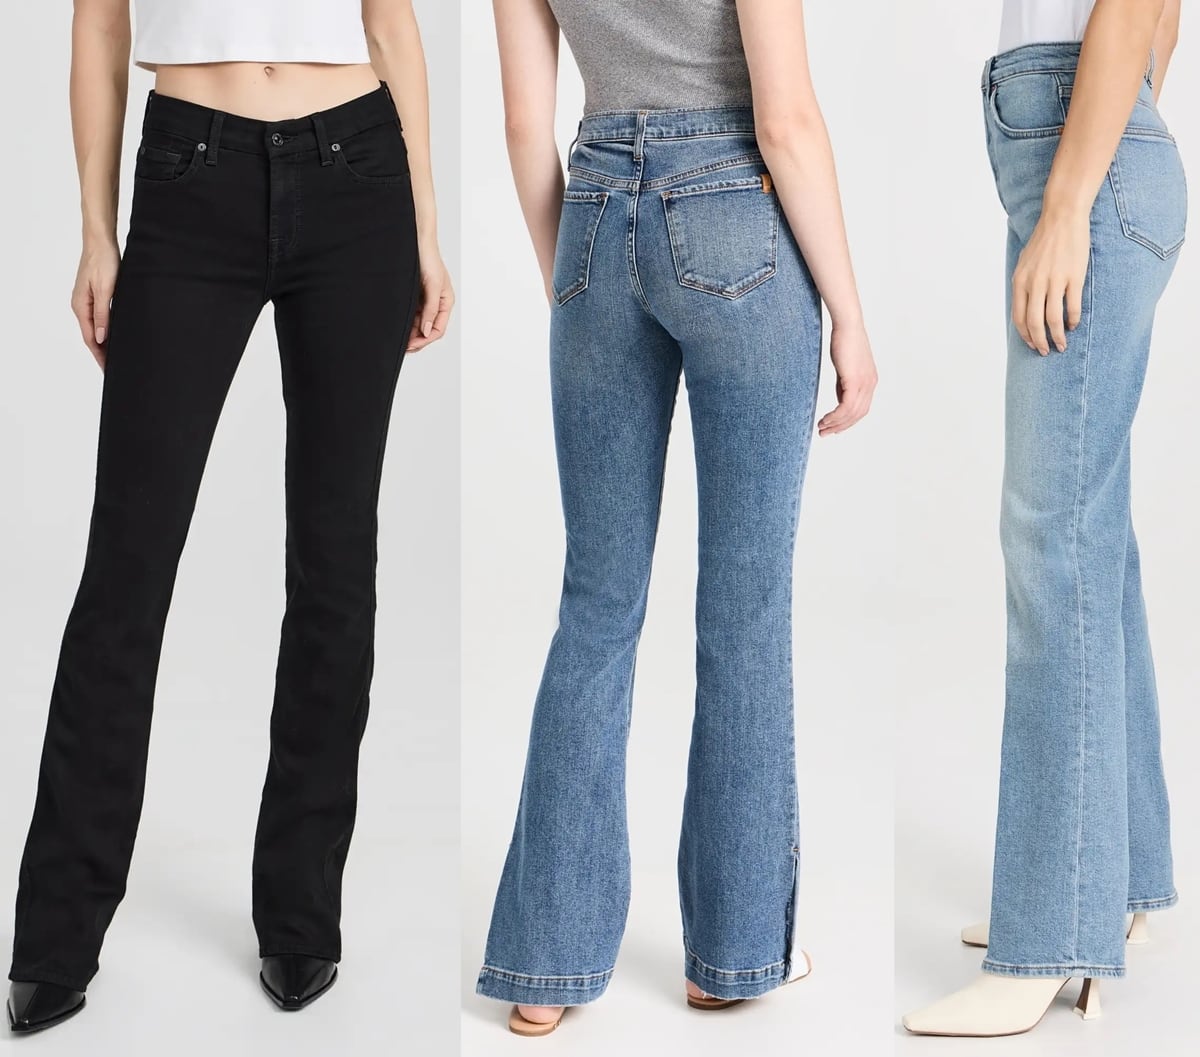 Bootcut Jeans for Women Are Classic, Timeless and Much Loved